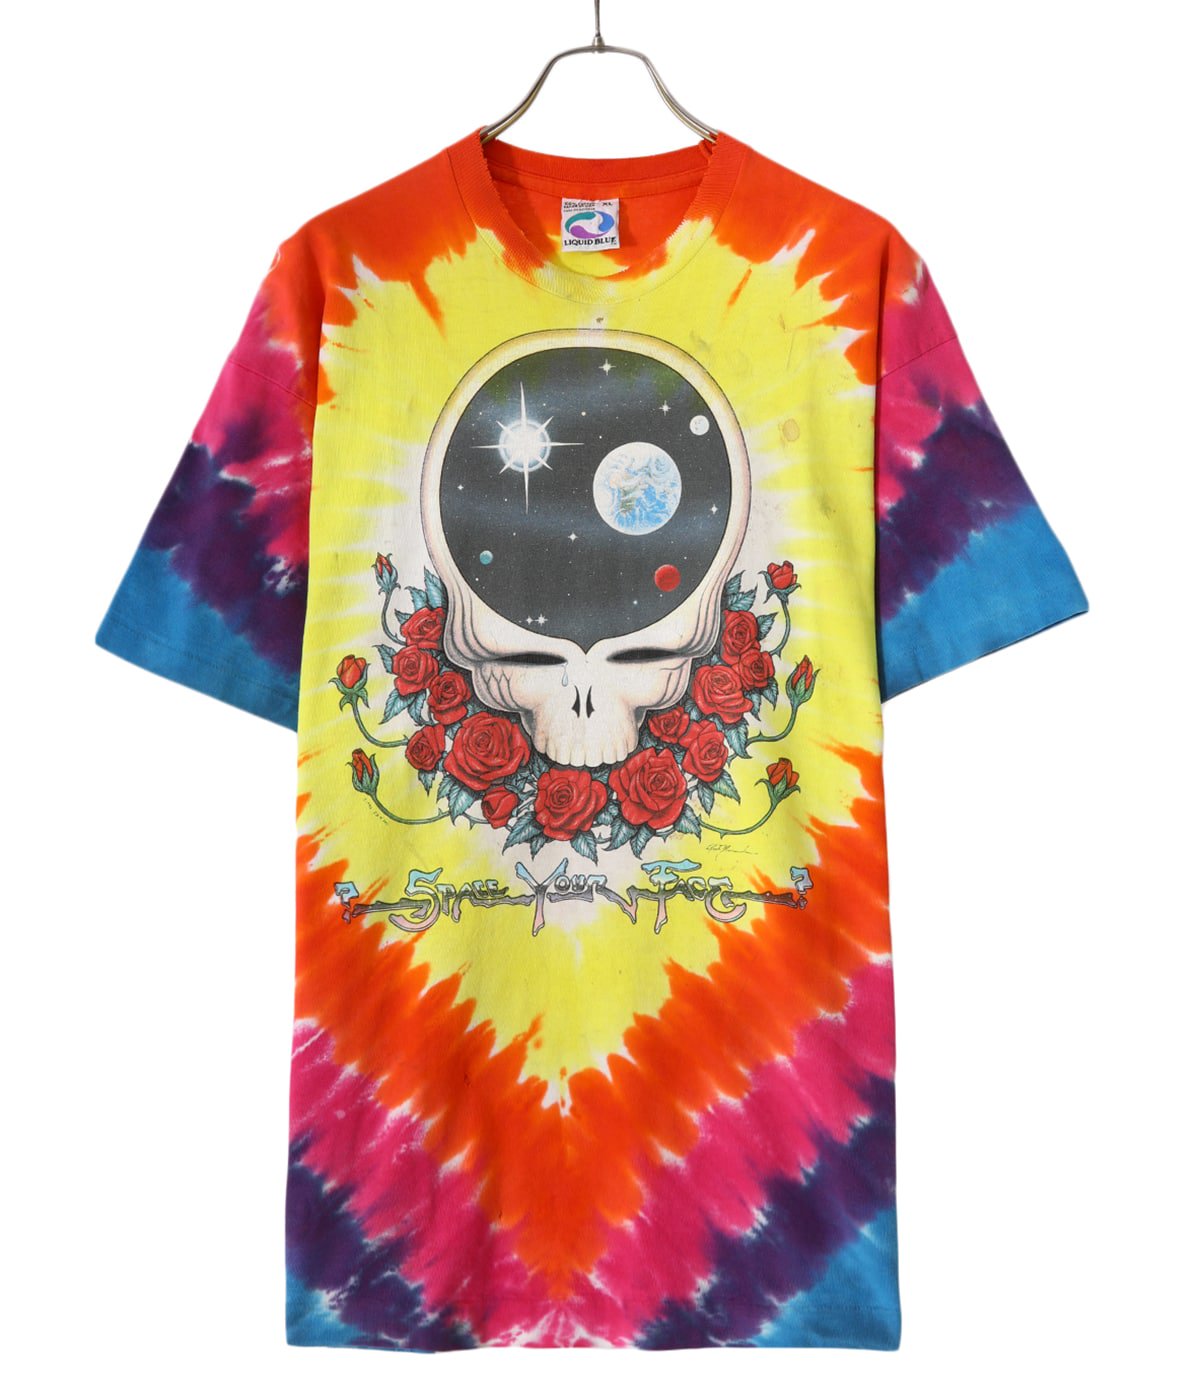 USED】GRATEFUL DEAD Tee | VINTAGE(ヴィンテージ) / ヴィンテージ T 